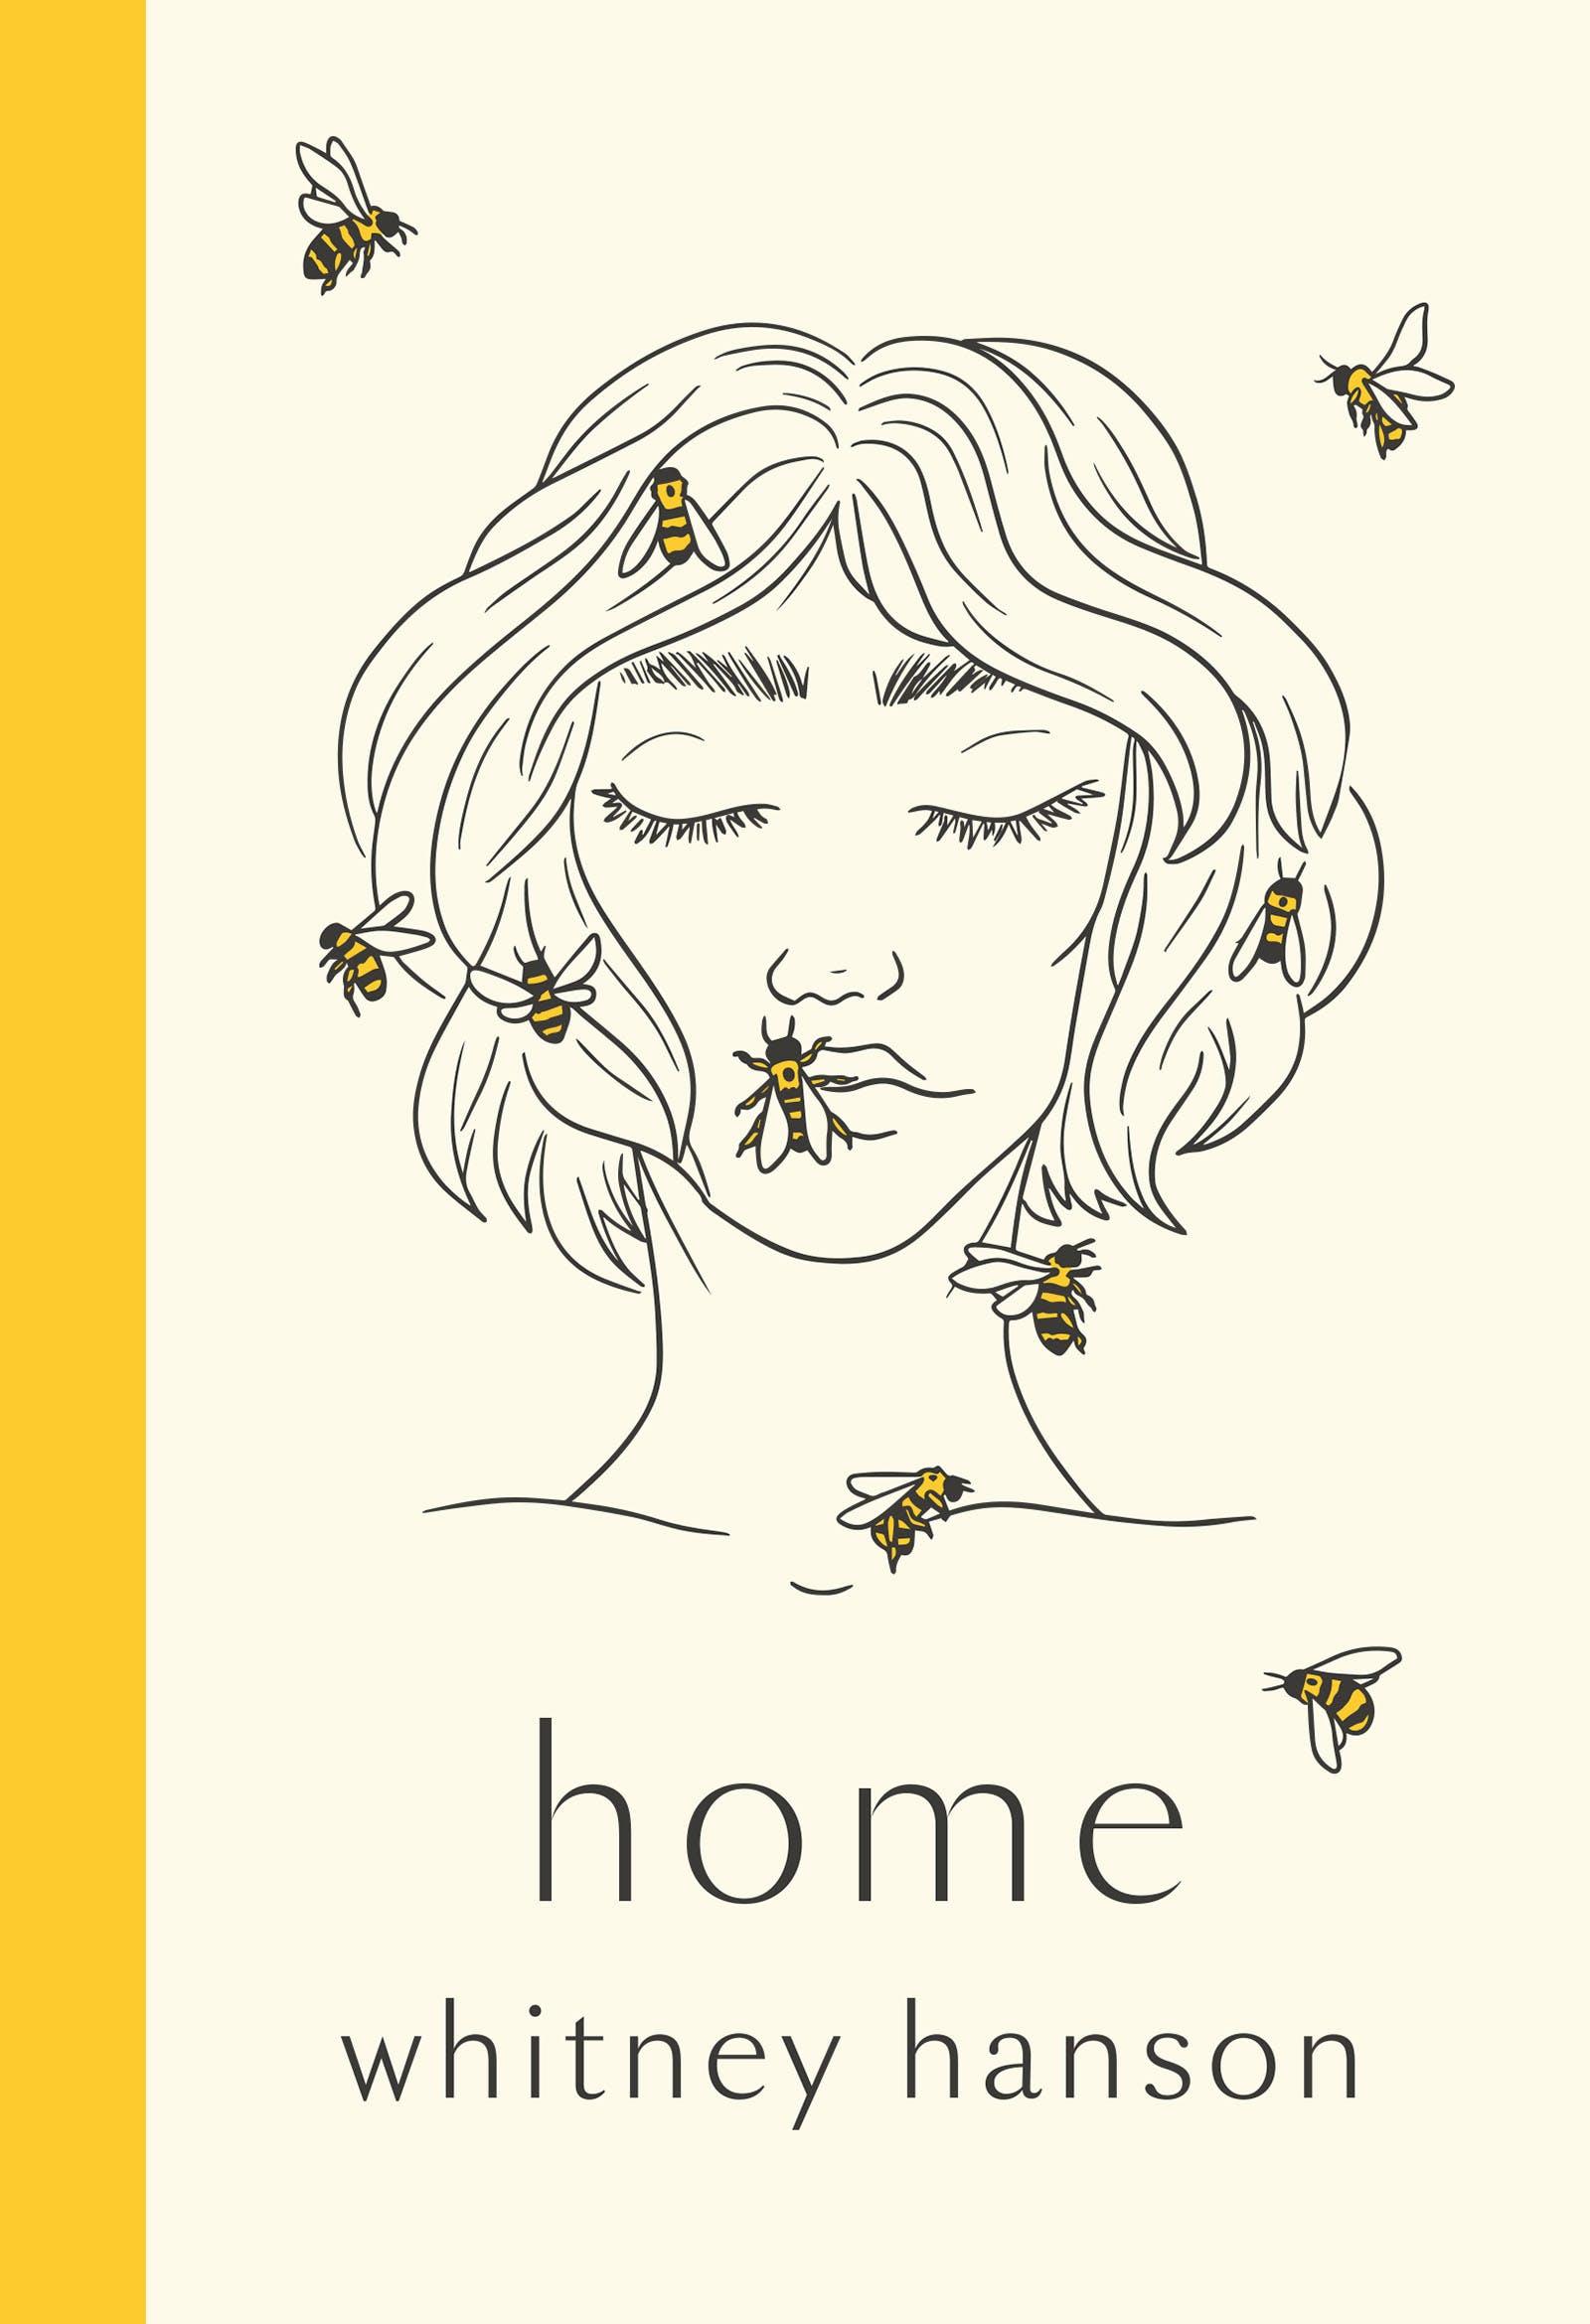 Home : poems to heal your heartbreak